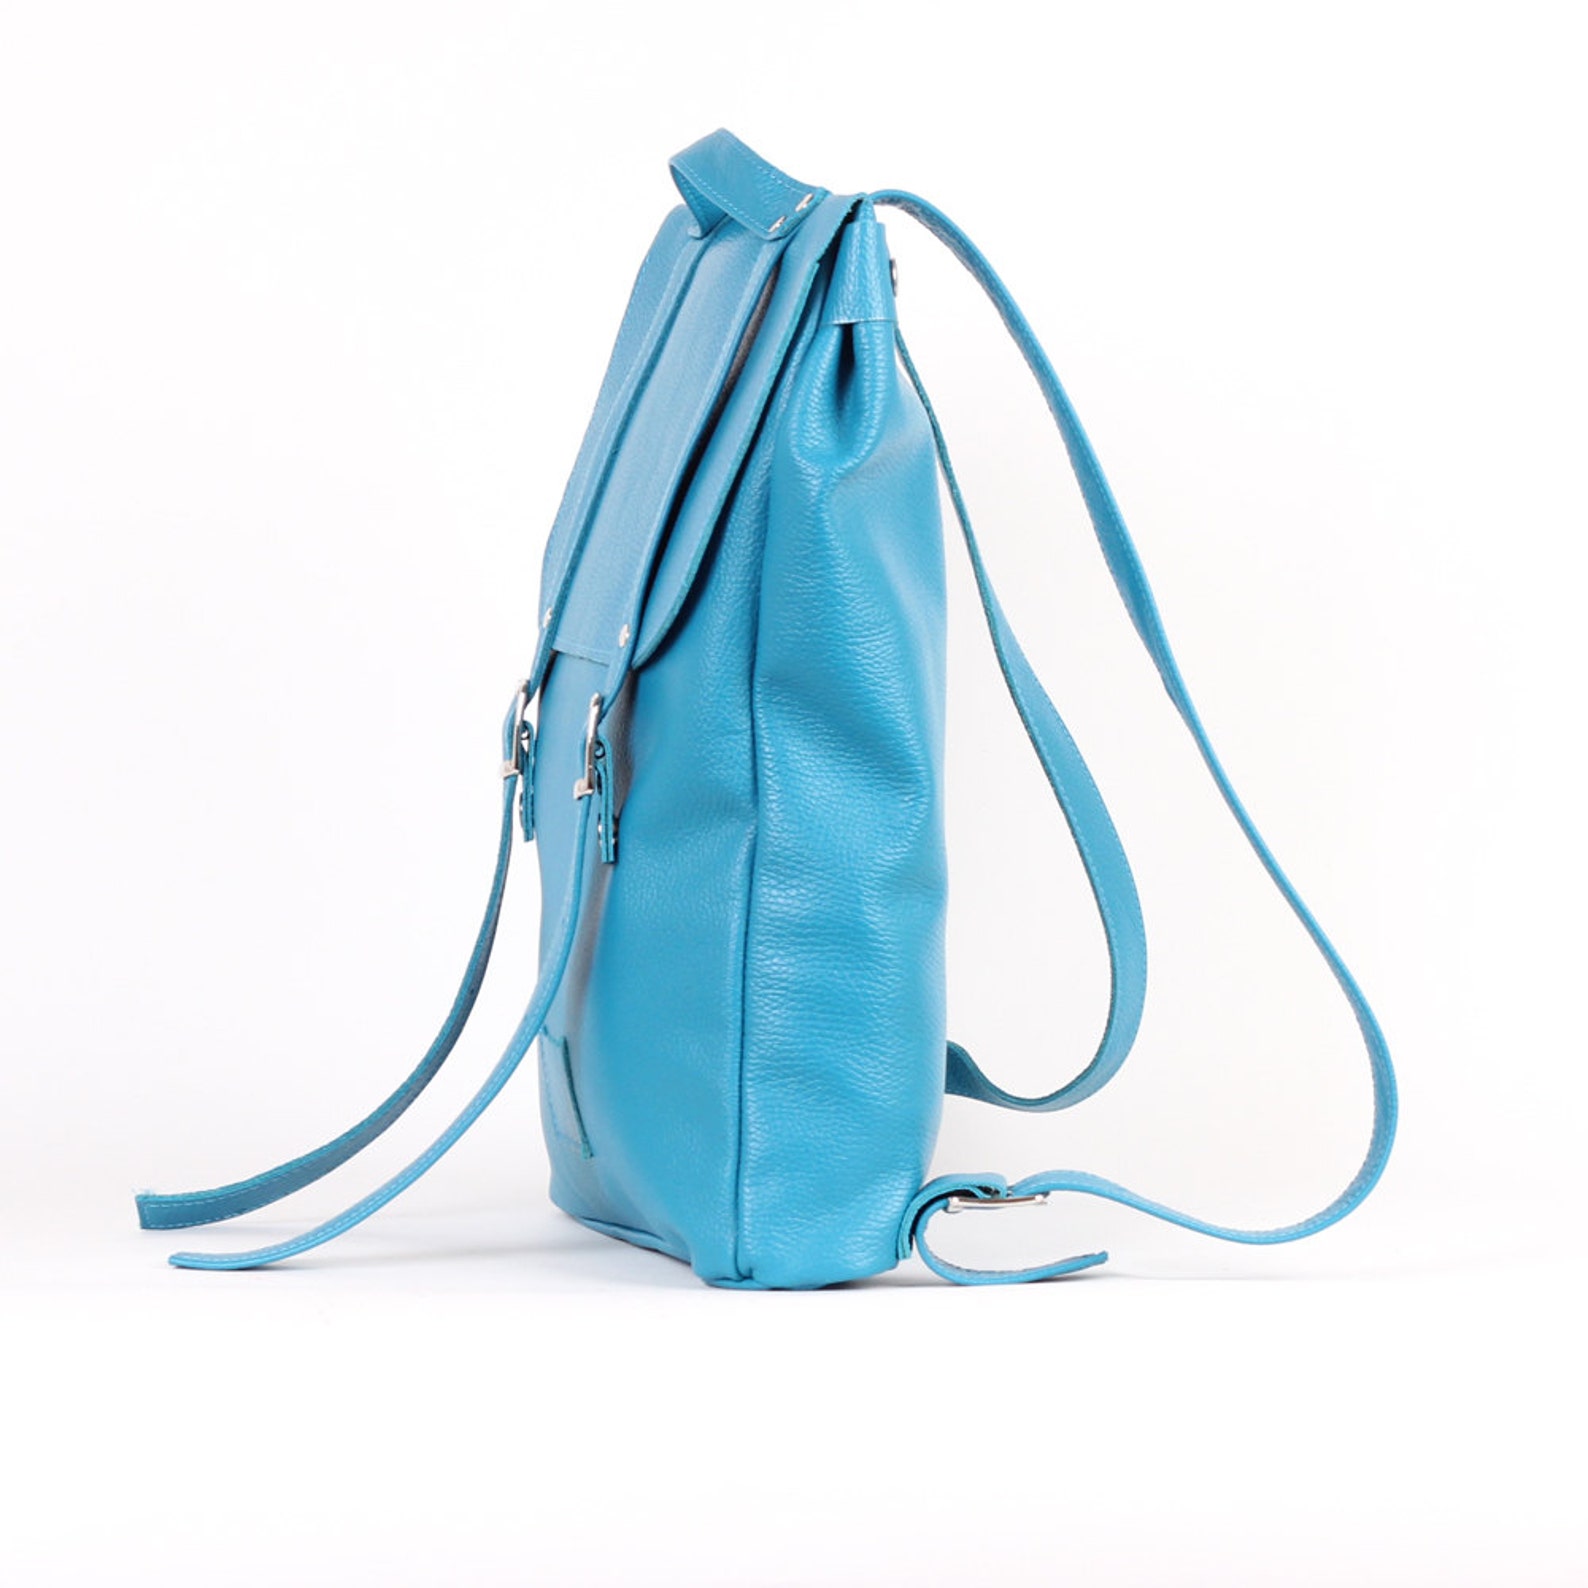 Turquoise Middle Size Leather Backpack Rucksack / in Stock / - Etsy